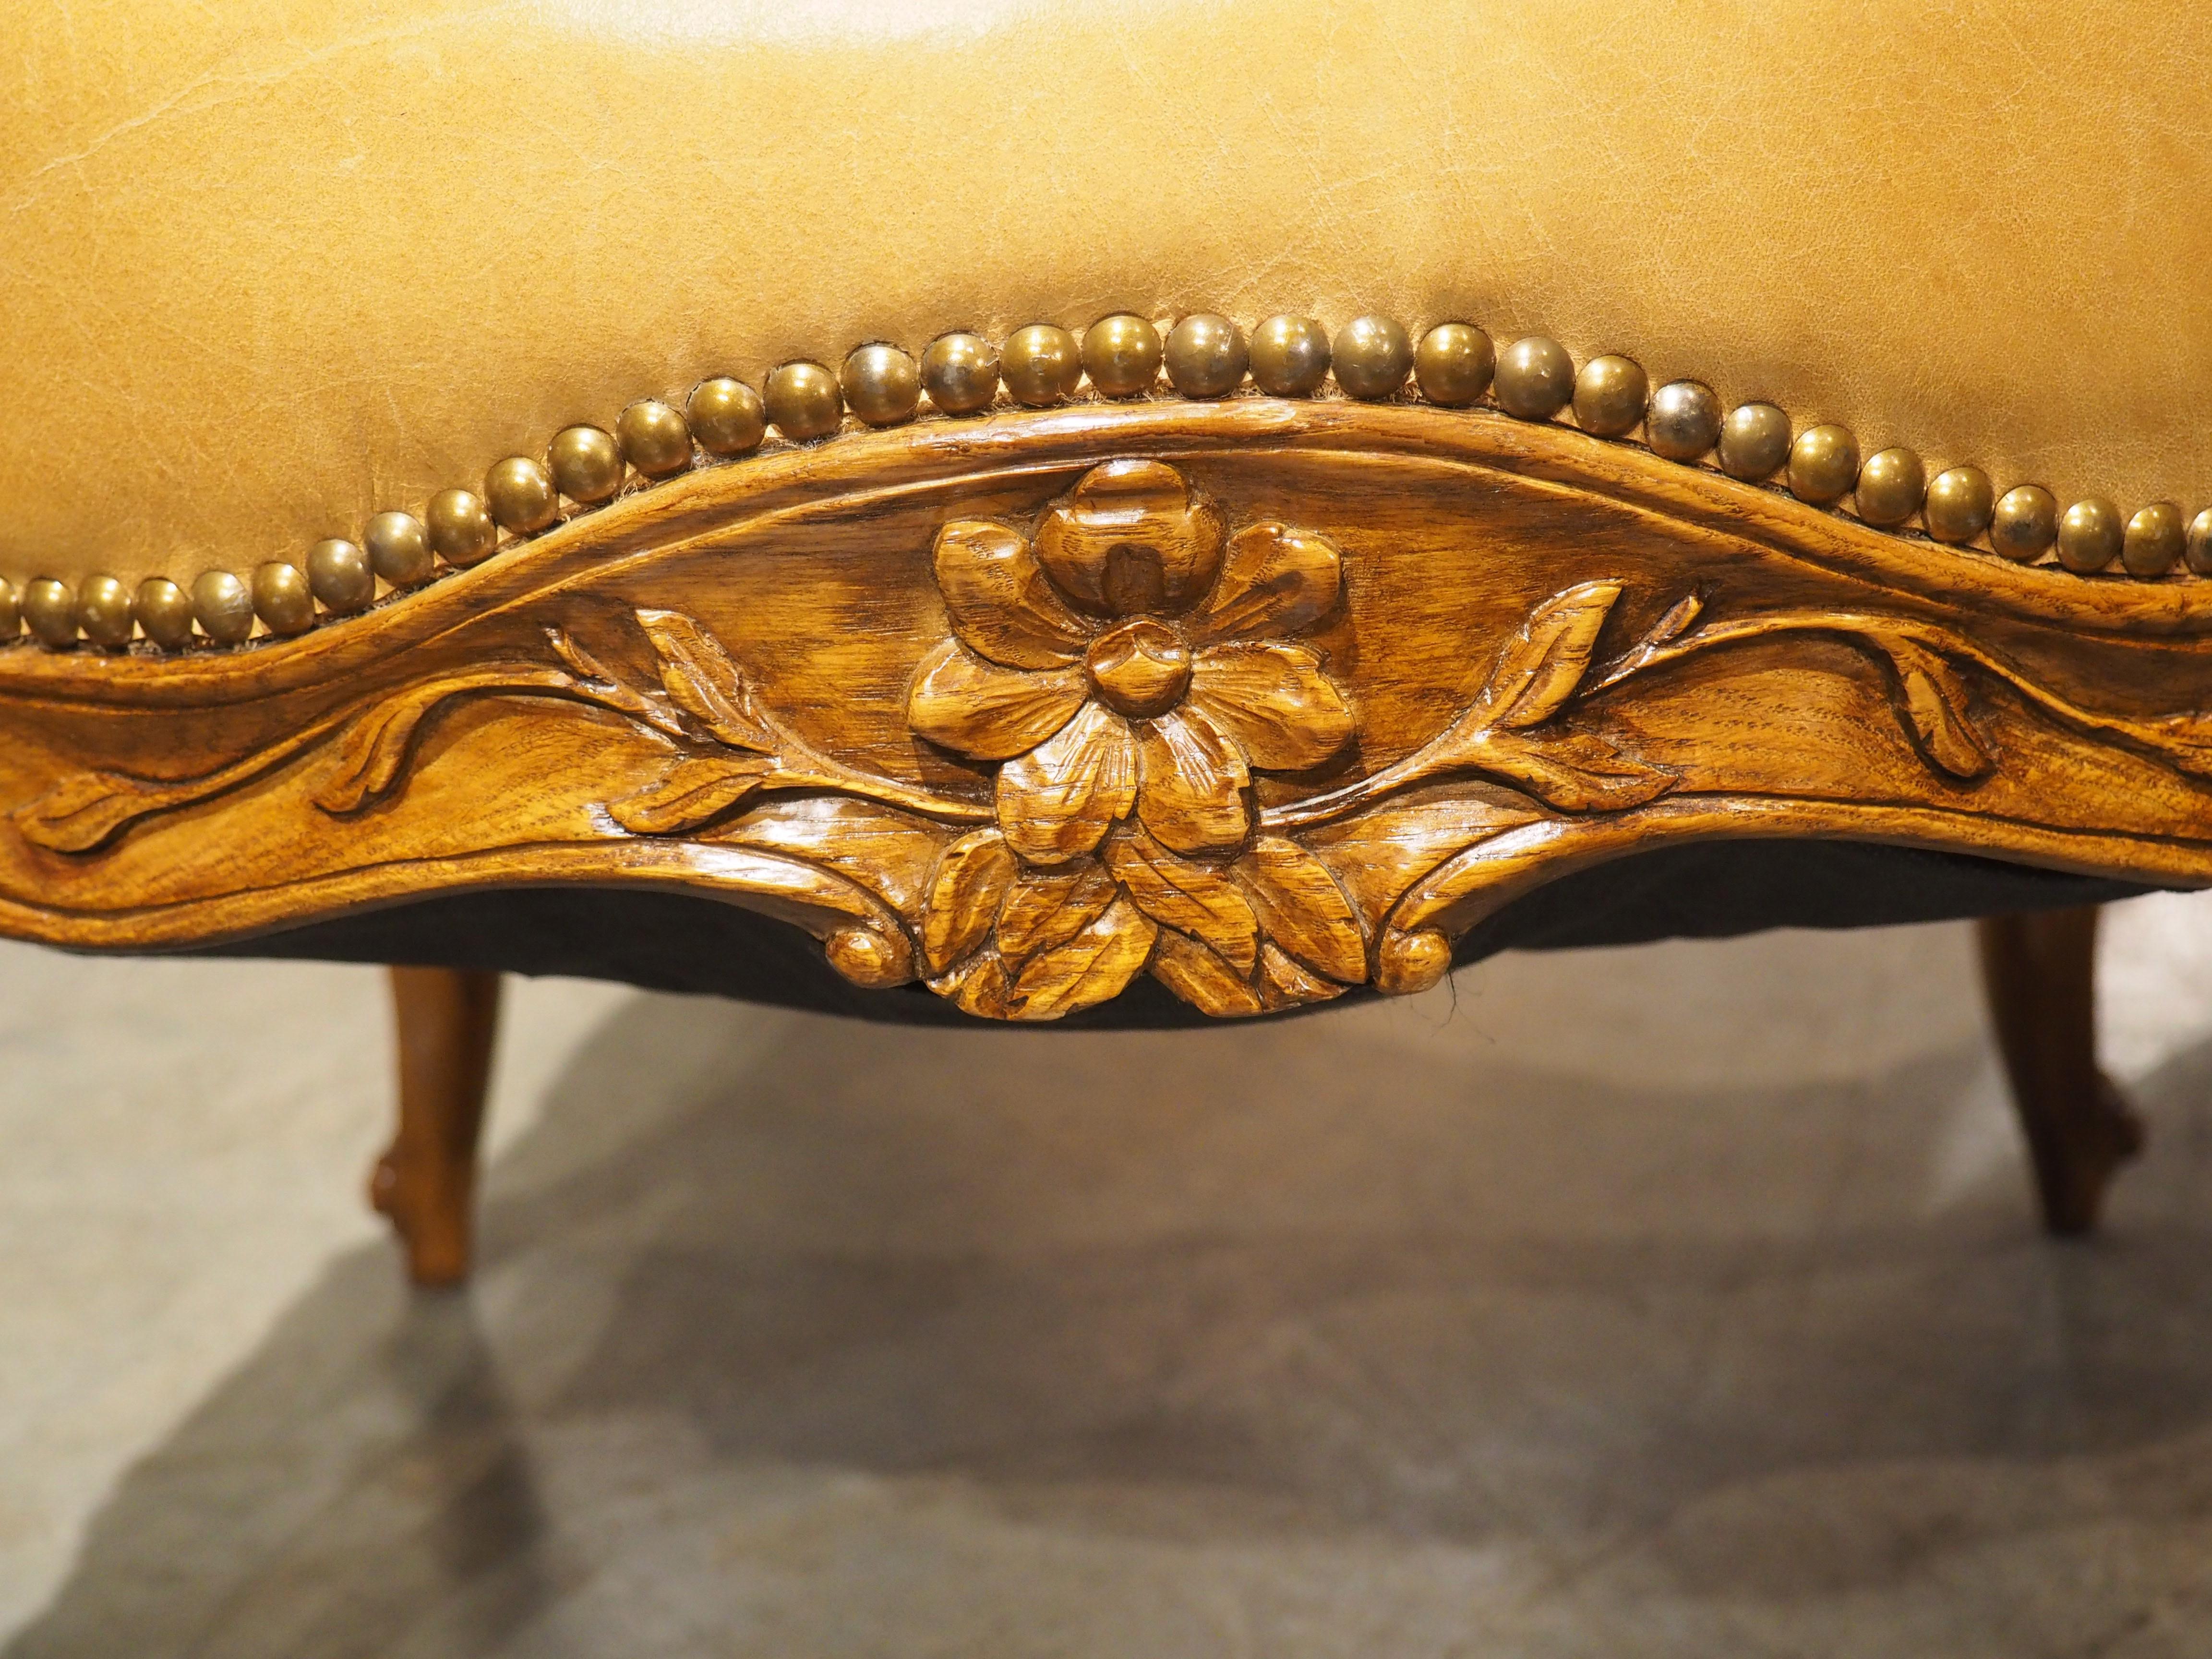 Pair of French Carved Regence Style Armchairs with Leather Upholstery, C. 1900 For Sale 2